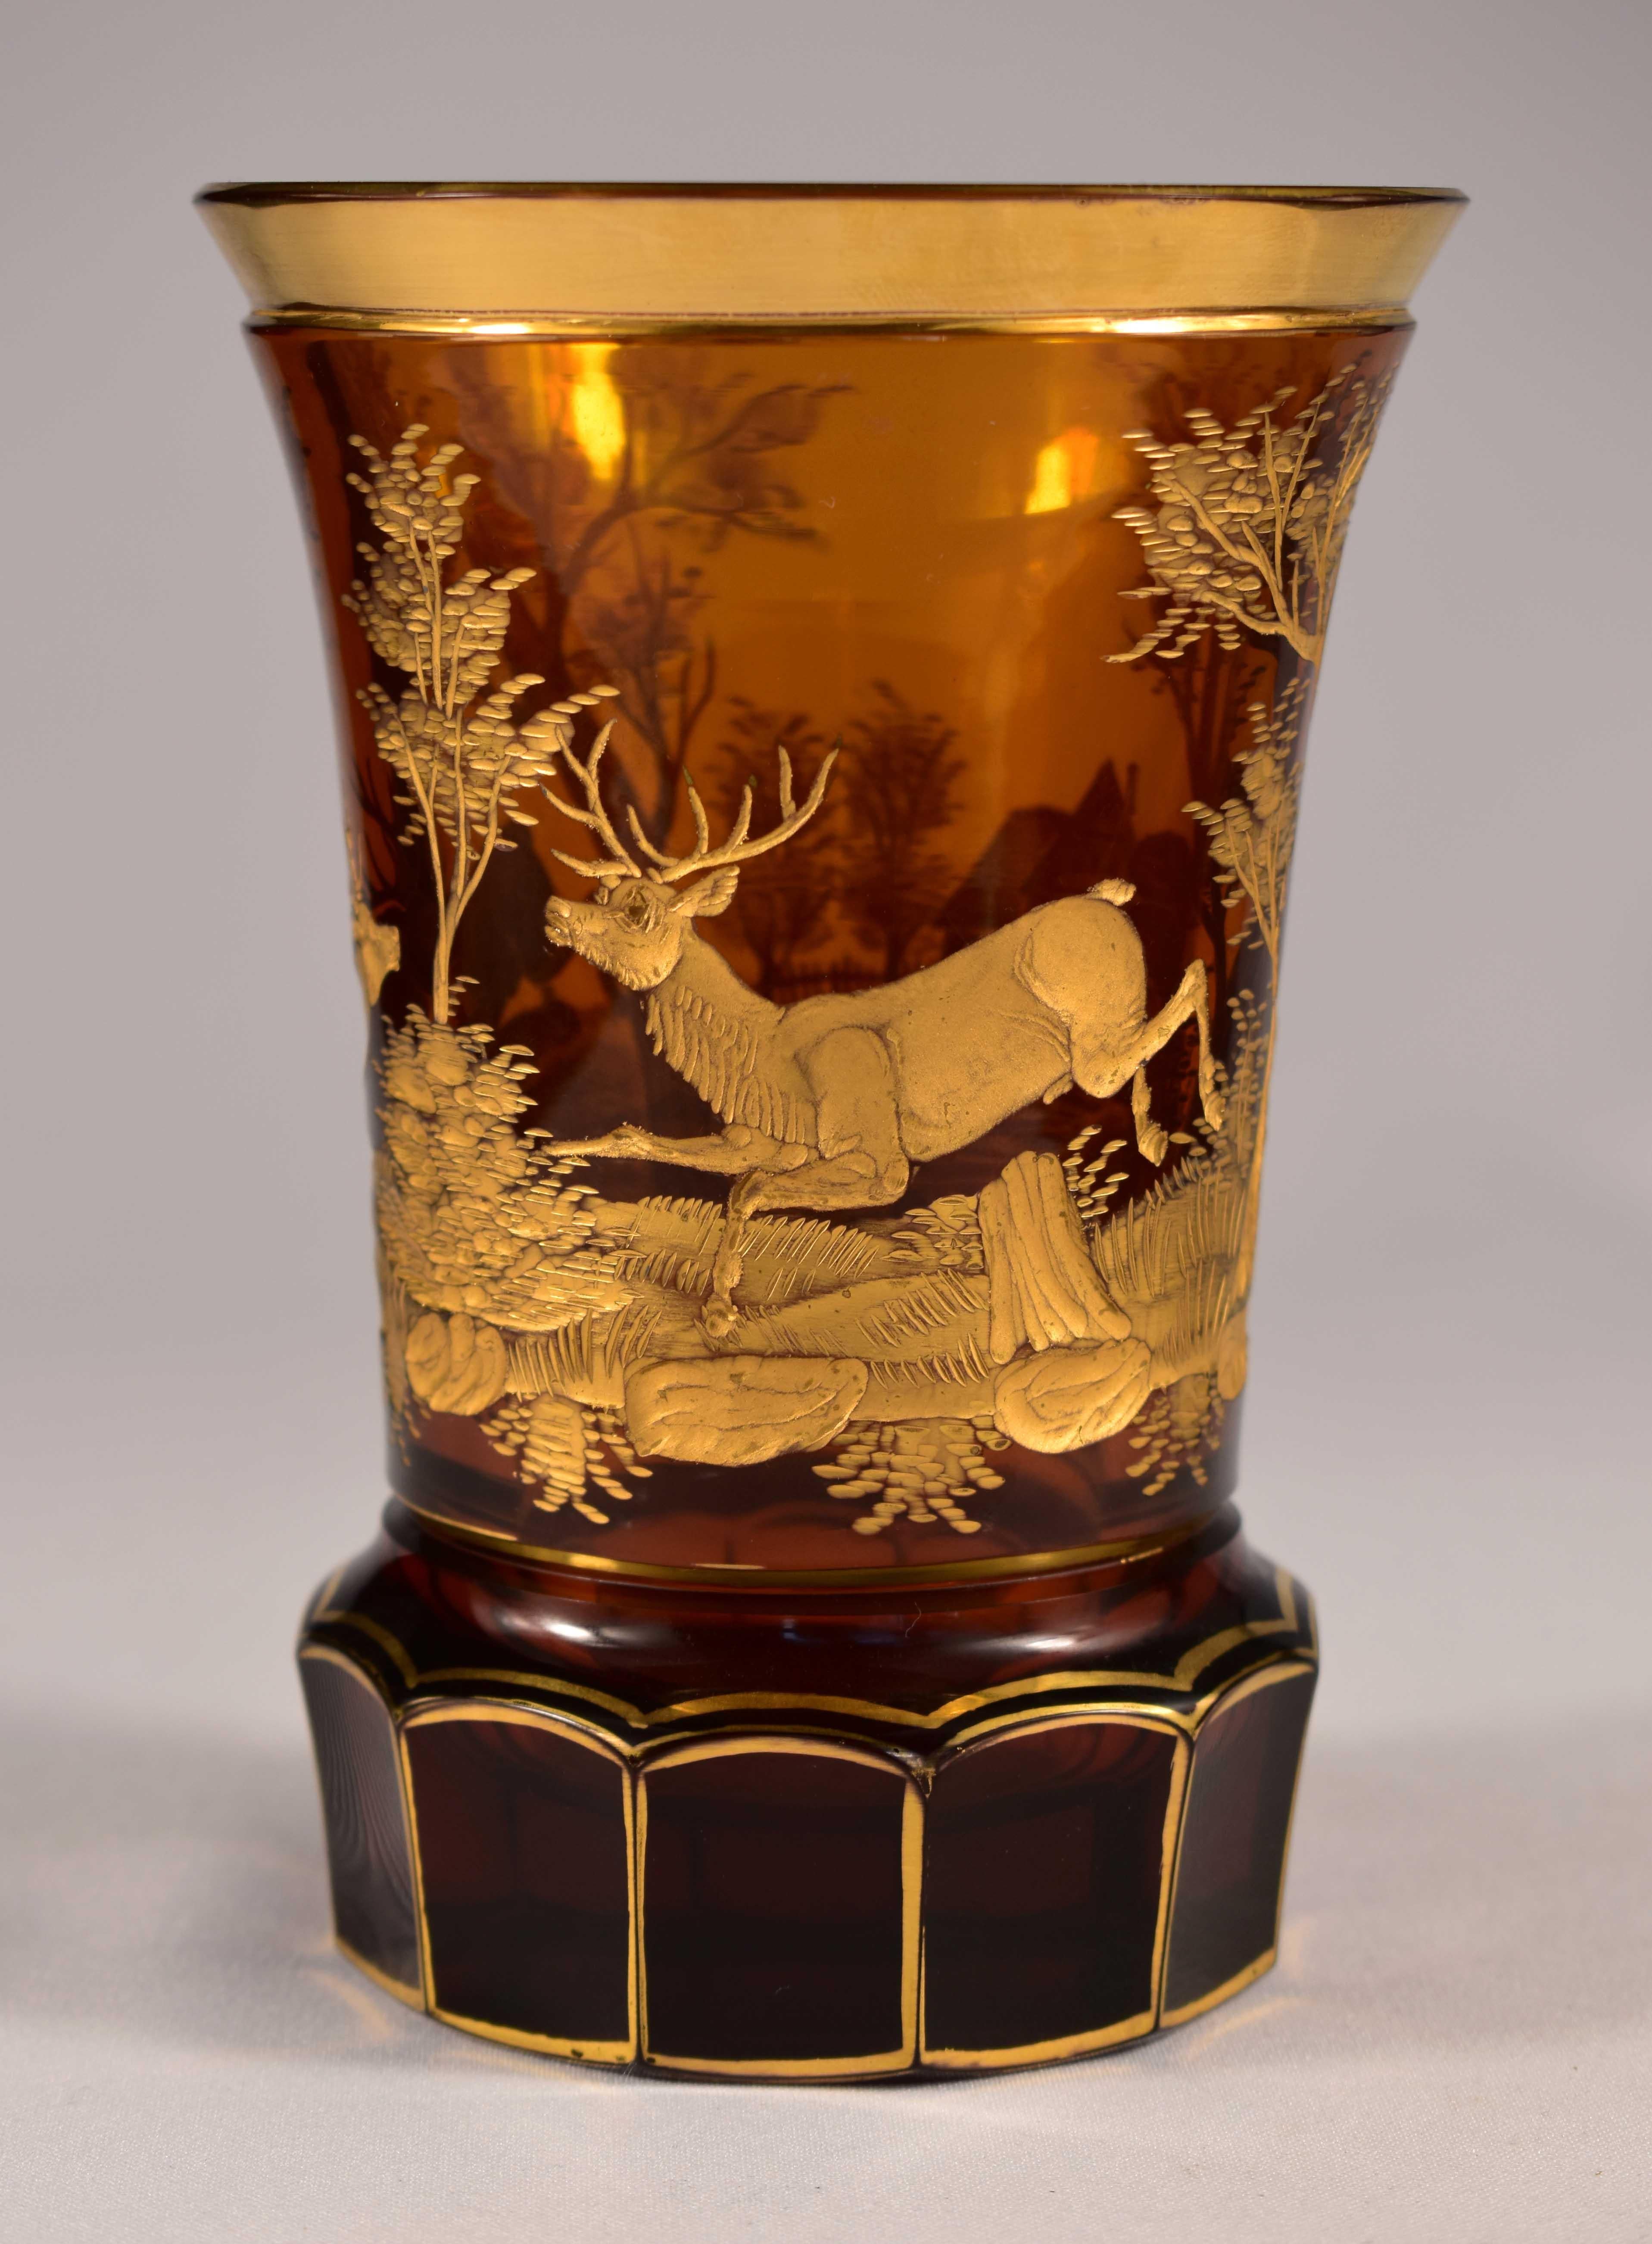 Beautiful goblet made of amber glass, gilded engraving with a hunting motif, 20th century Bohemian Glass- Undamaged